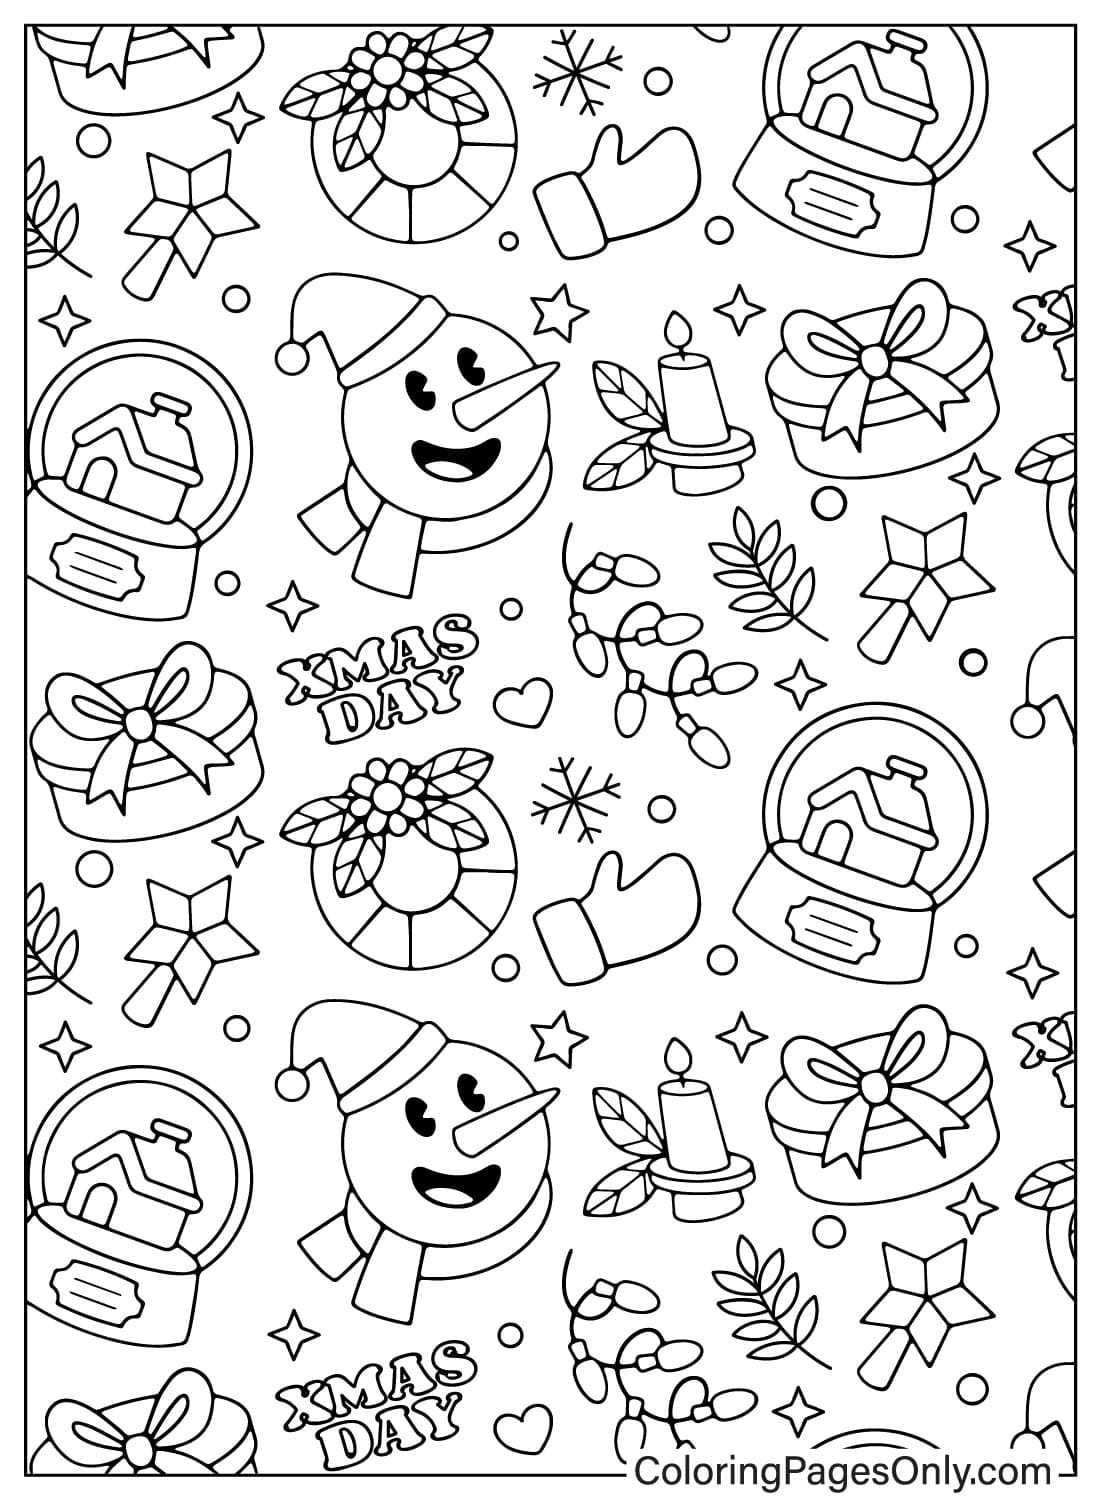 Christmas Pattern Coloring Page Free Printable from Christmas Pattern